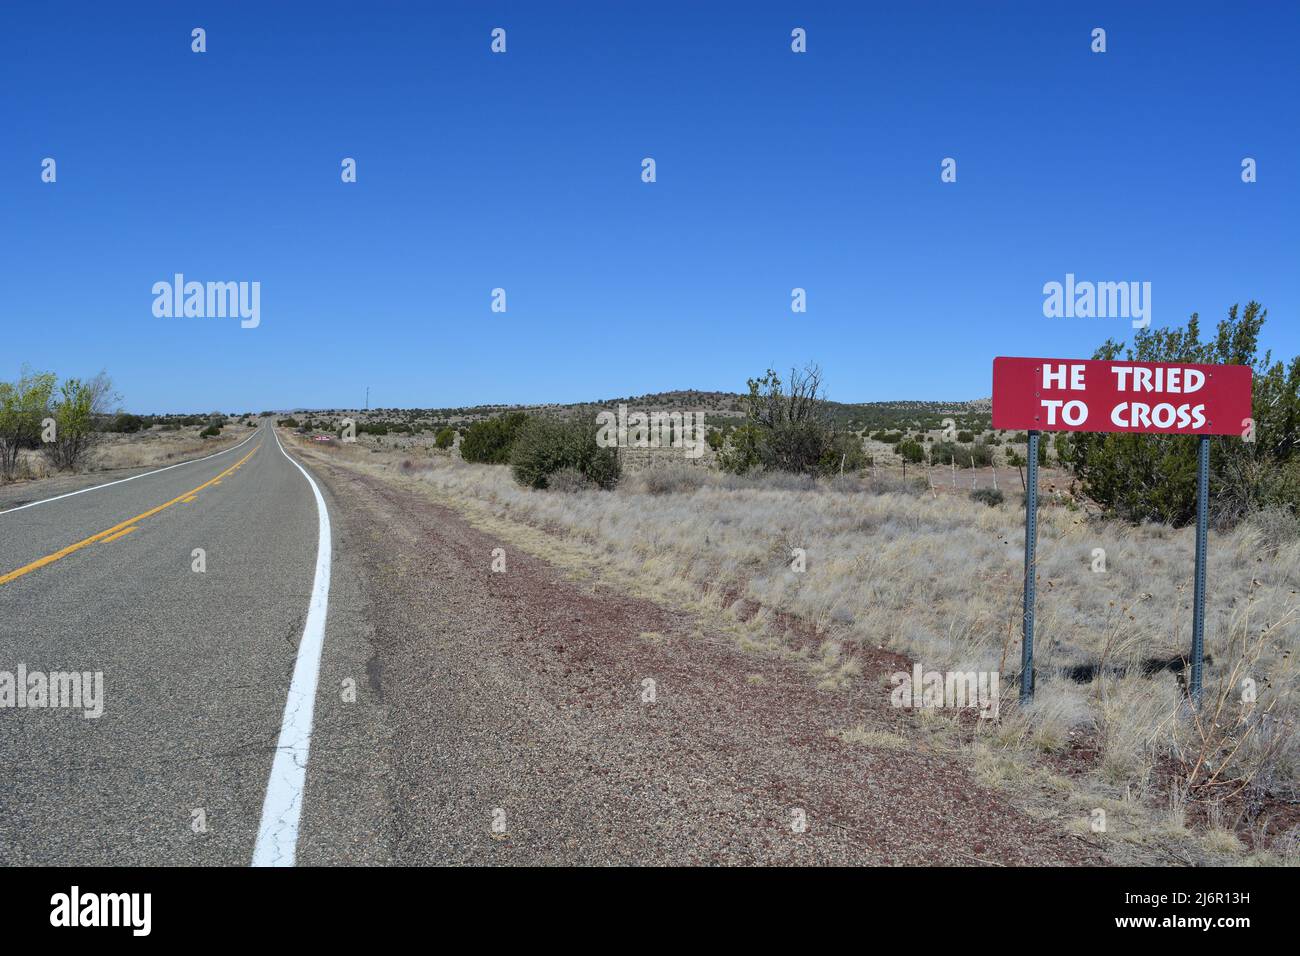 Legendary Burma Shave adverts on Route 66 Stock Photo